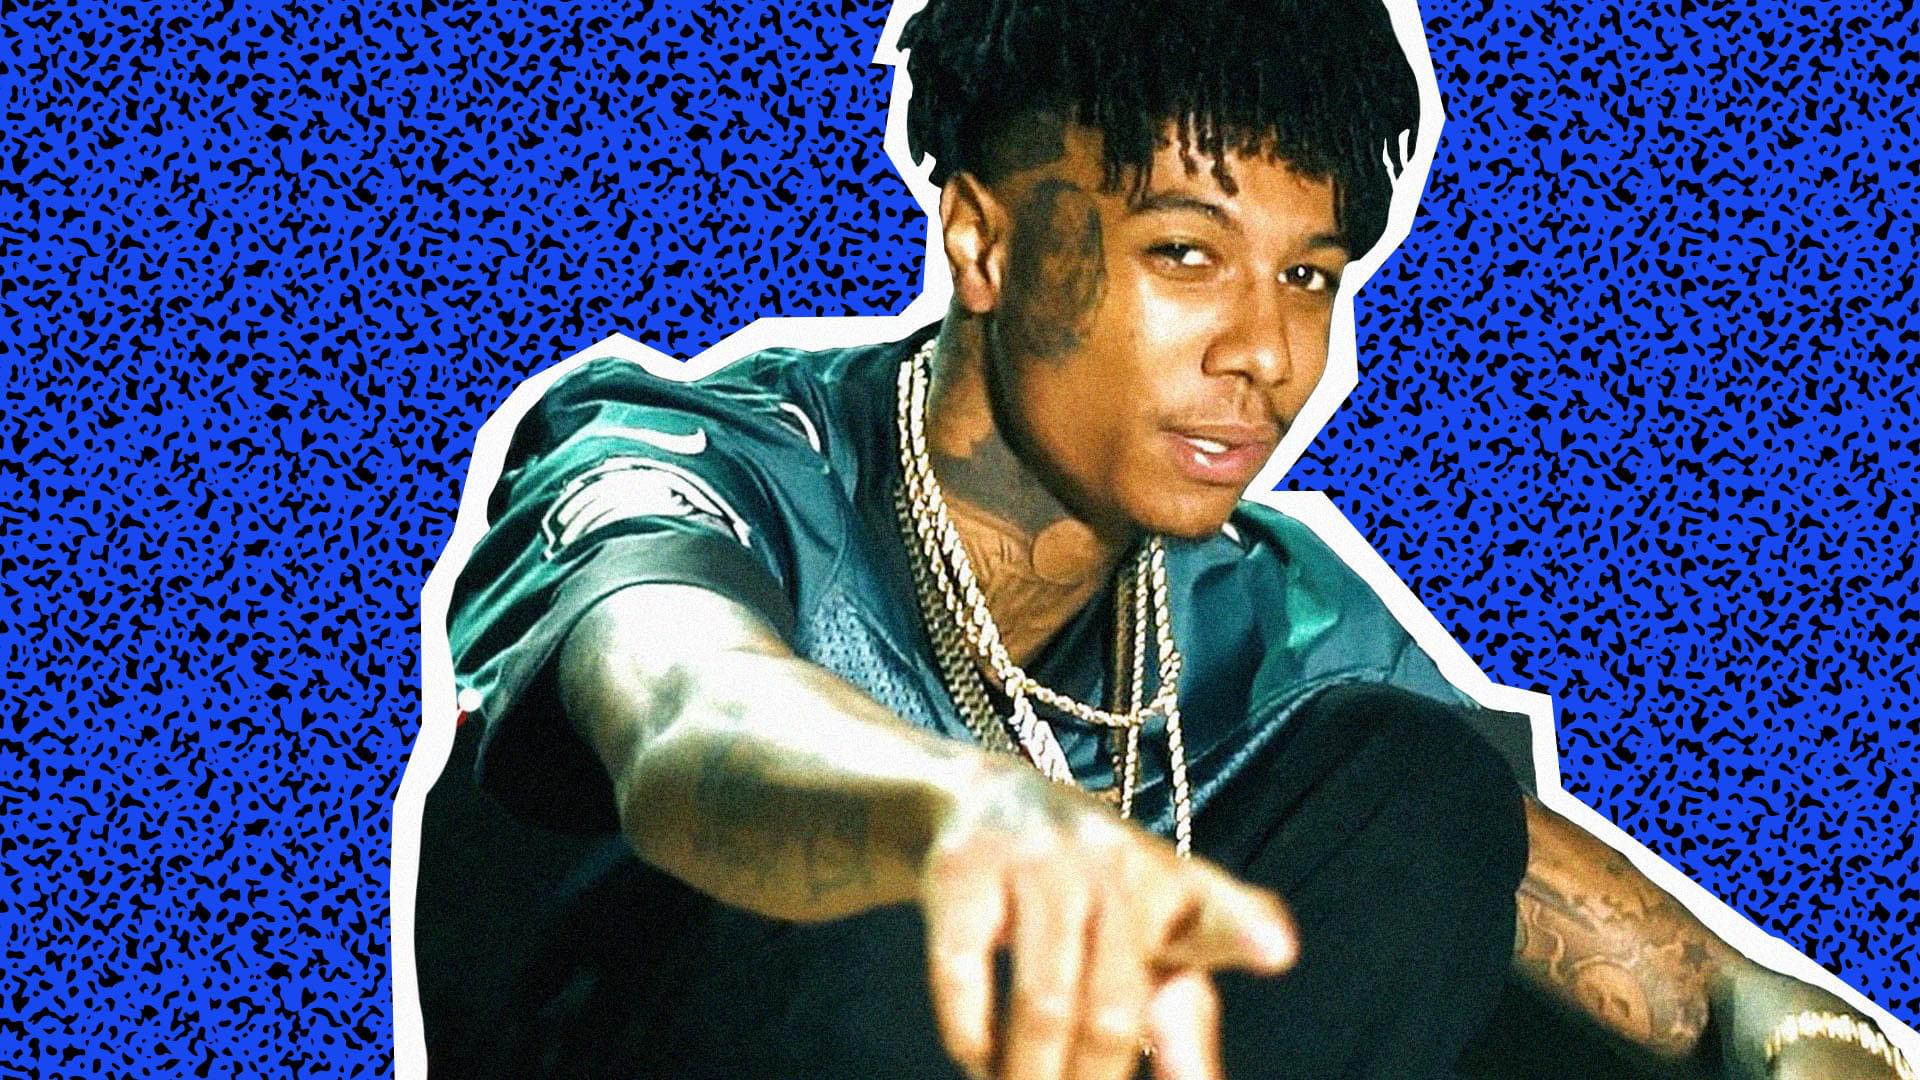 blueface ya aight  Rapper wallpaper iphone Iconic wallpaper Cute rappers